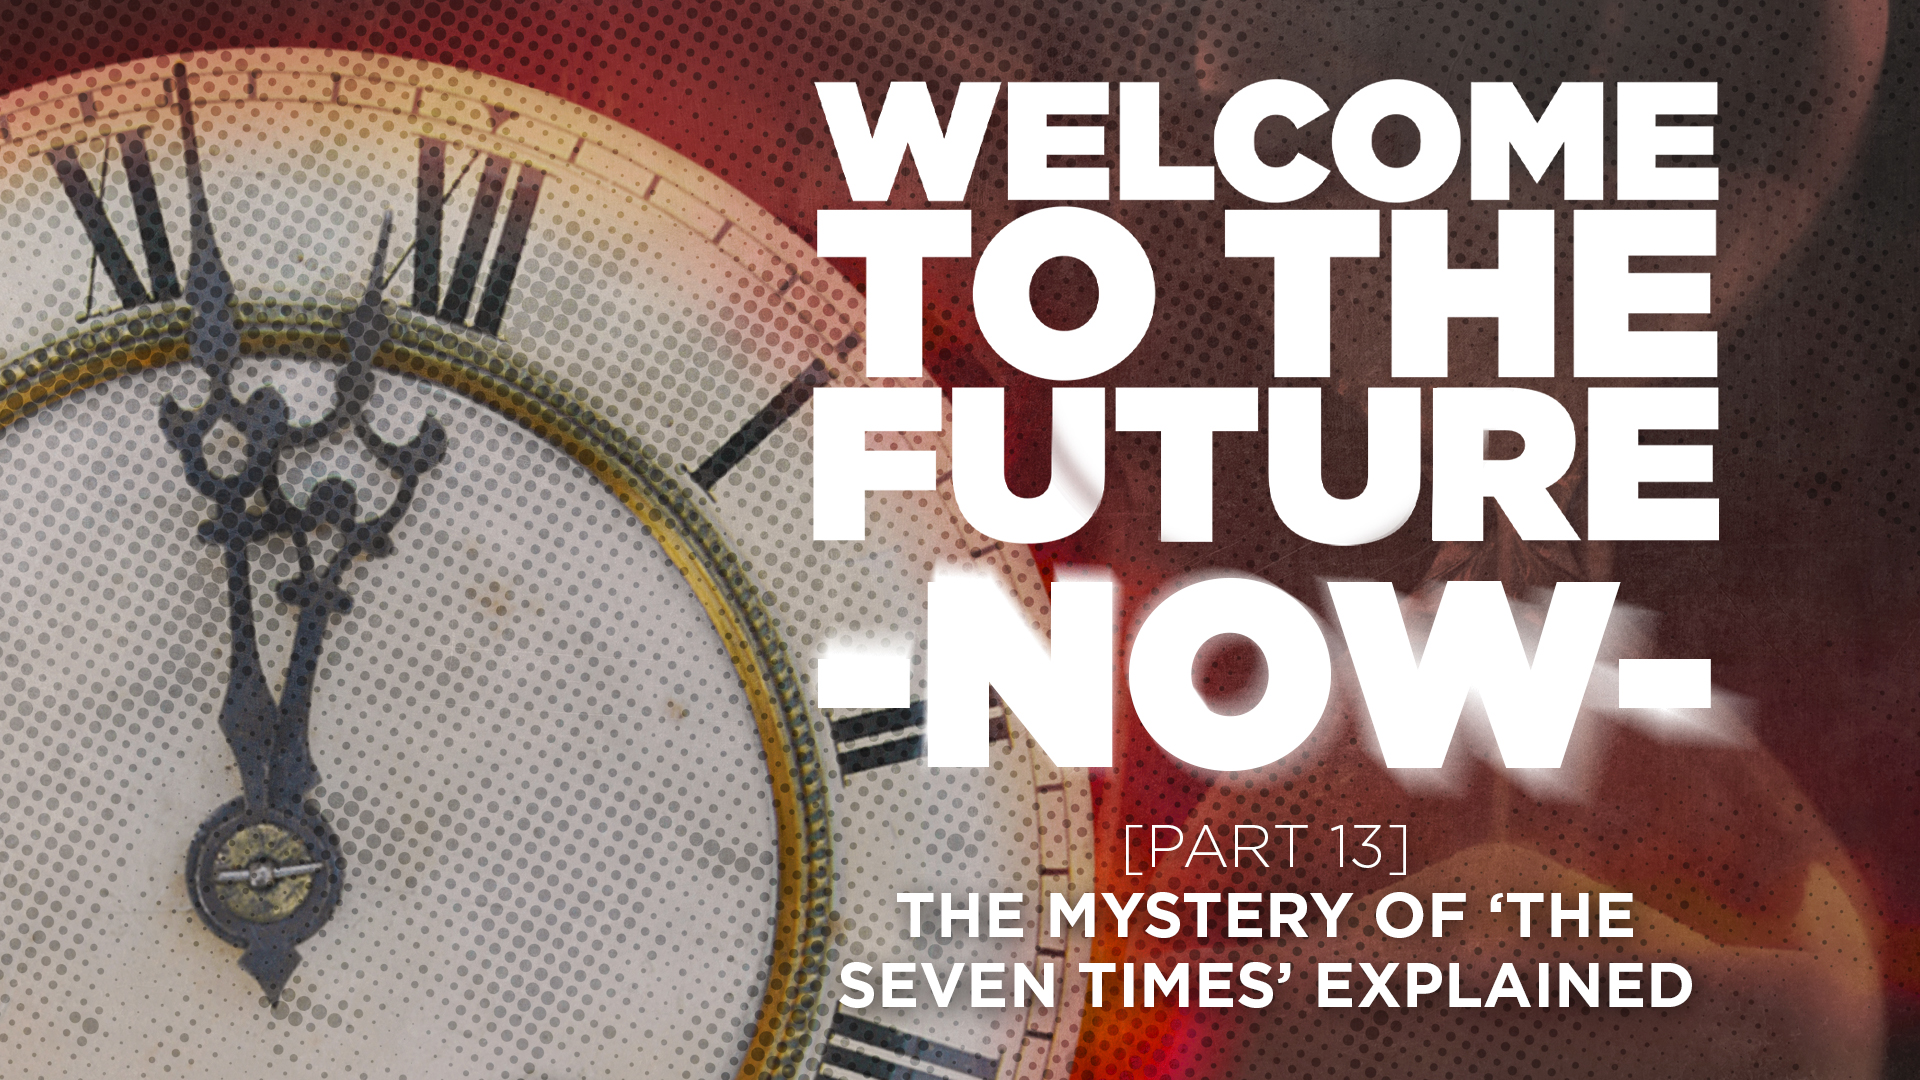 Part 13 - The Mystery Of ‘The Seven Times’ Explained